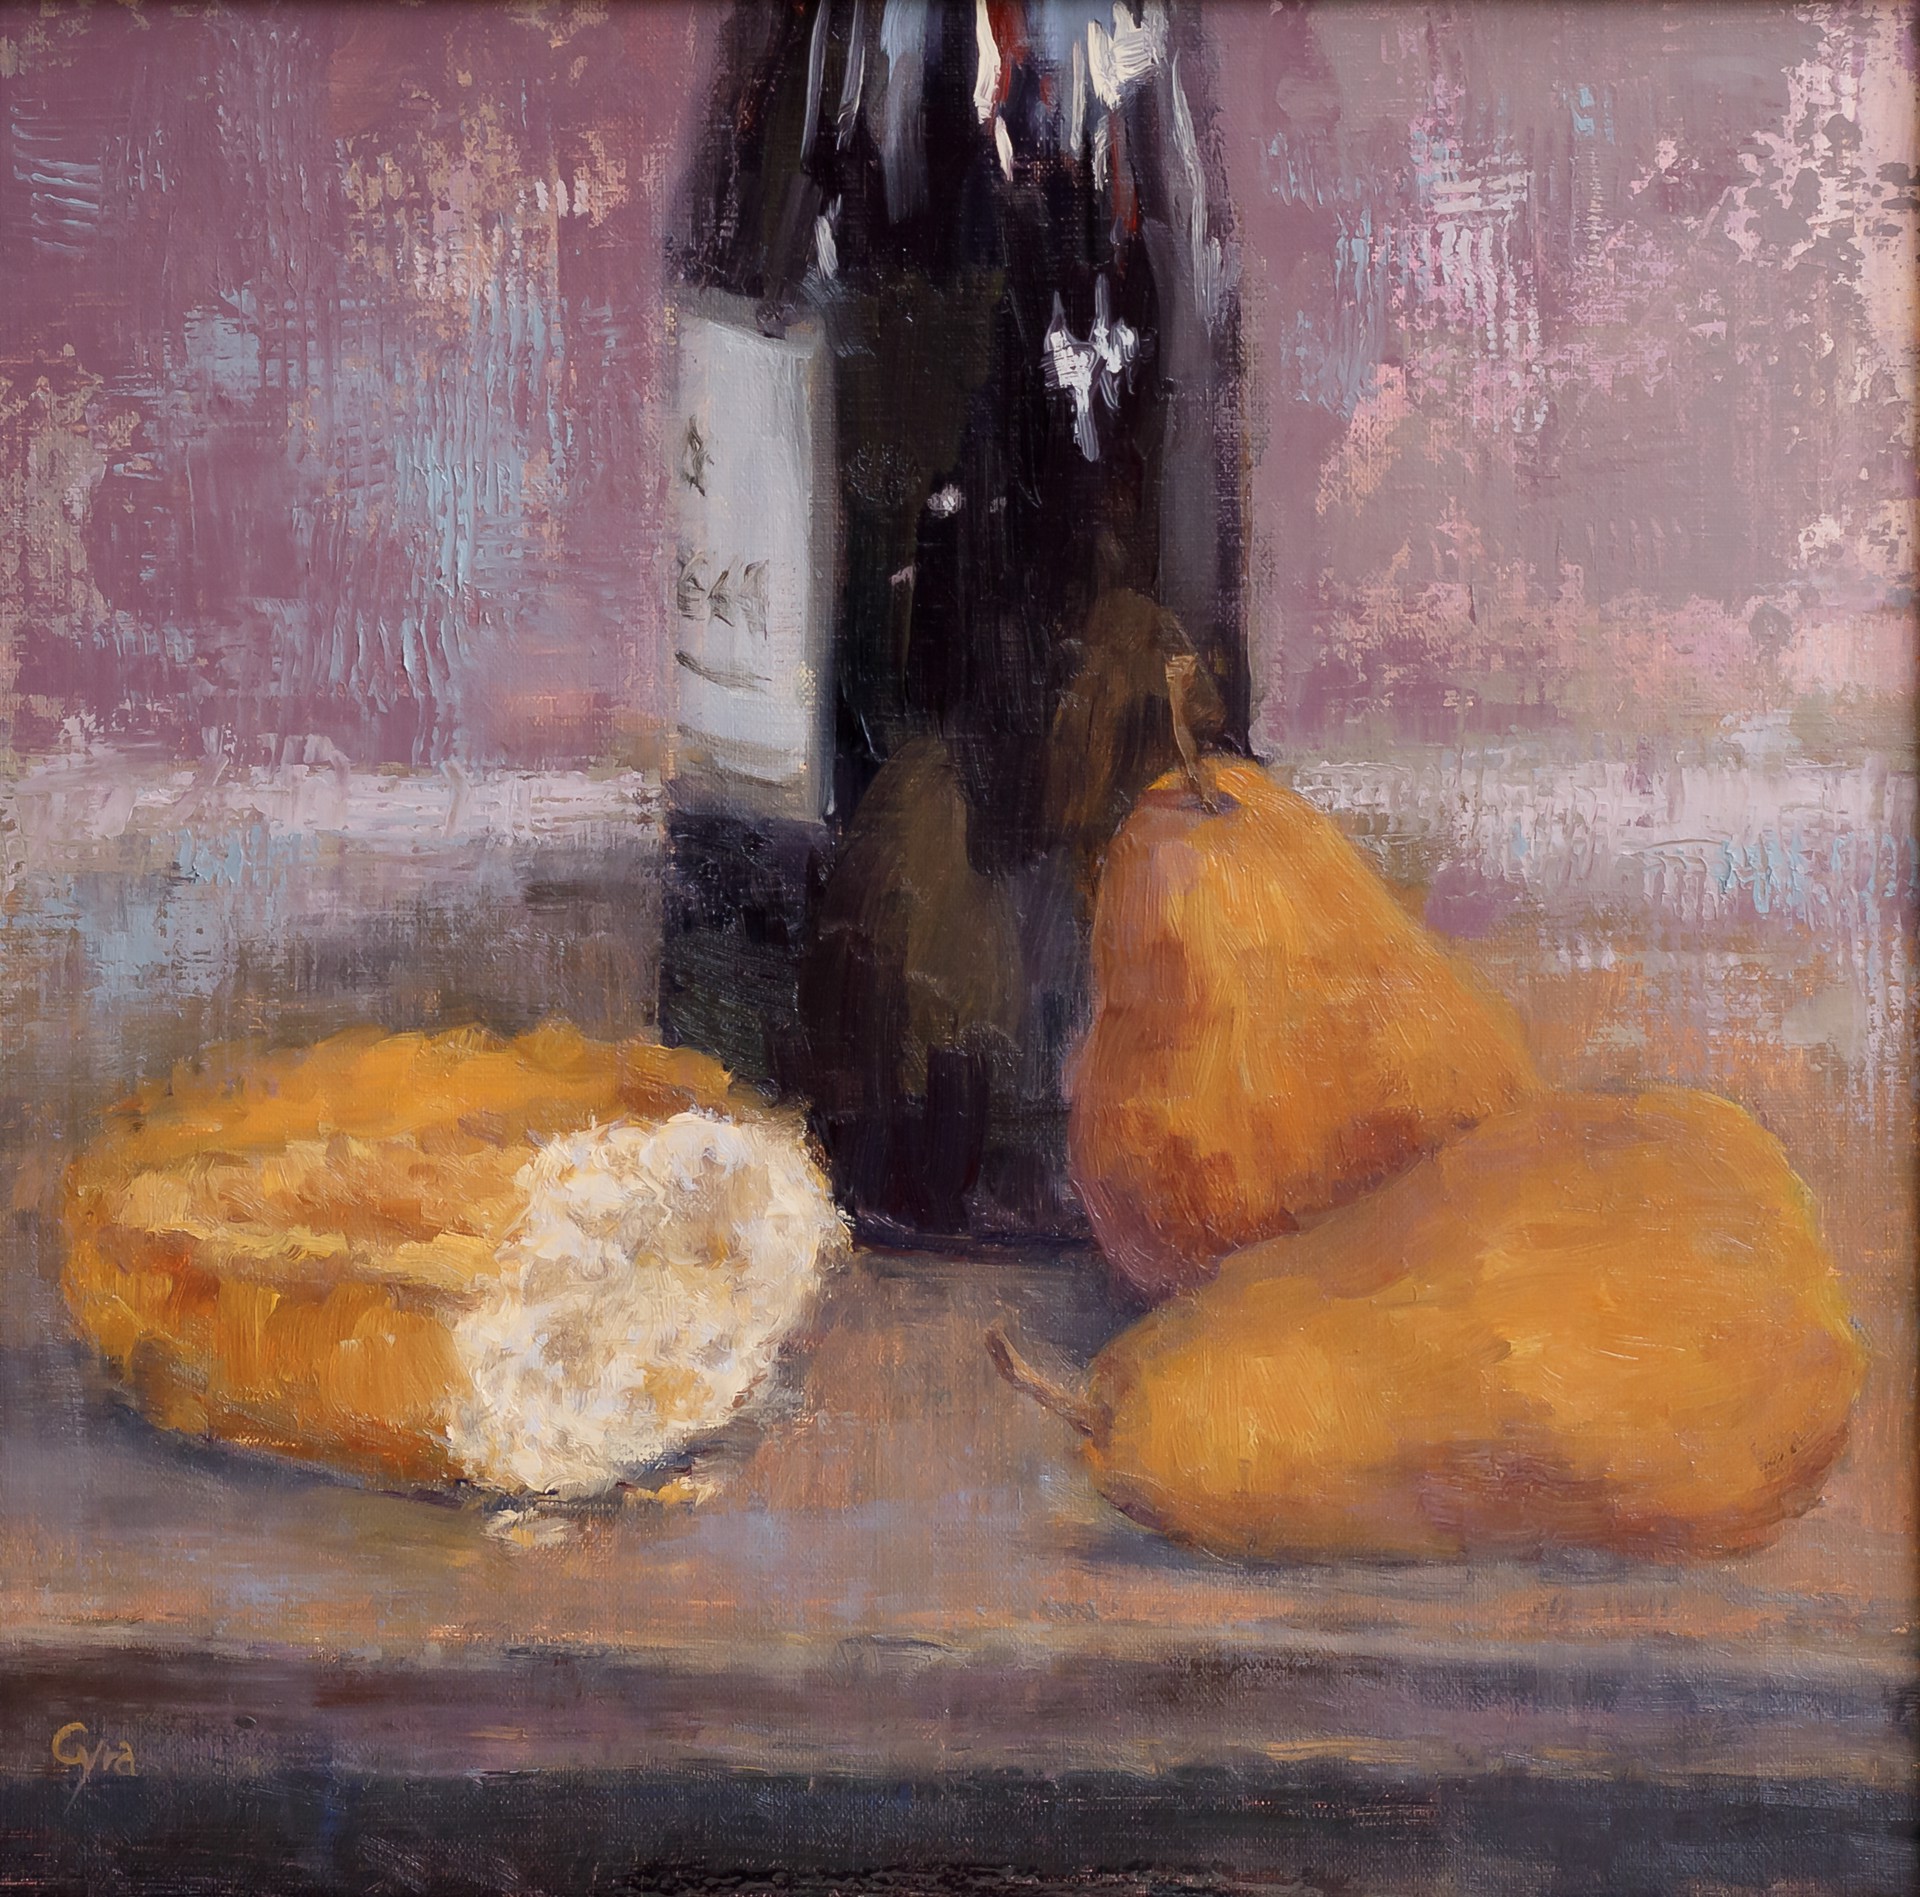 Pairs Well with Pears by Michael Cyra